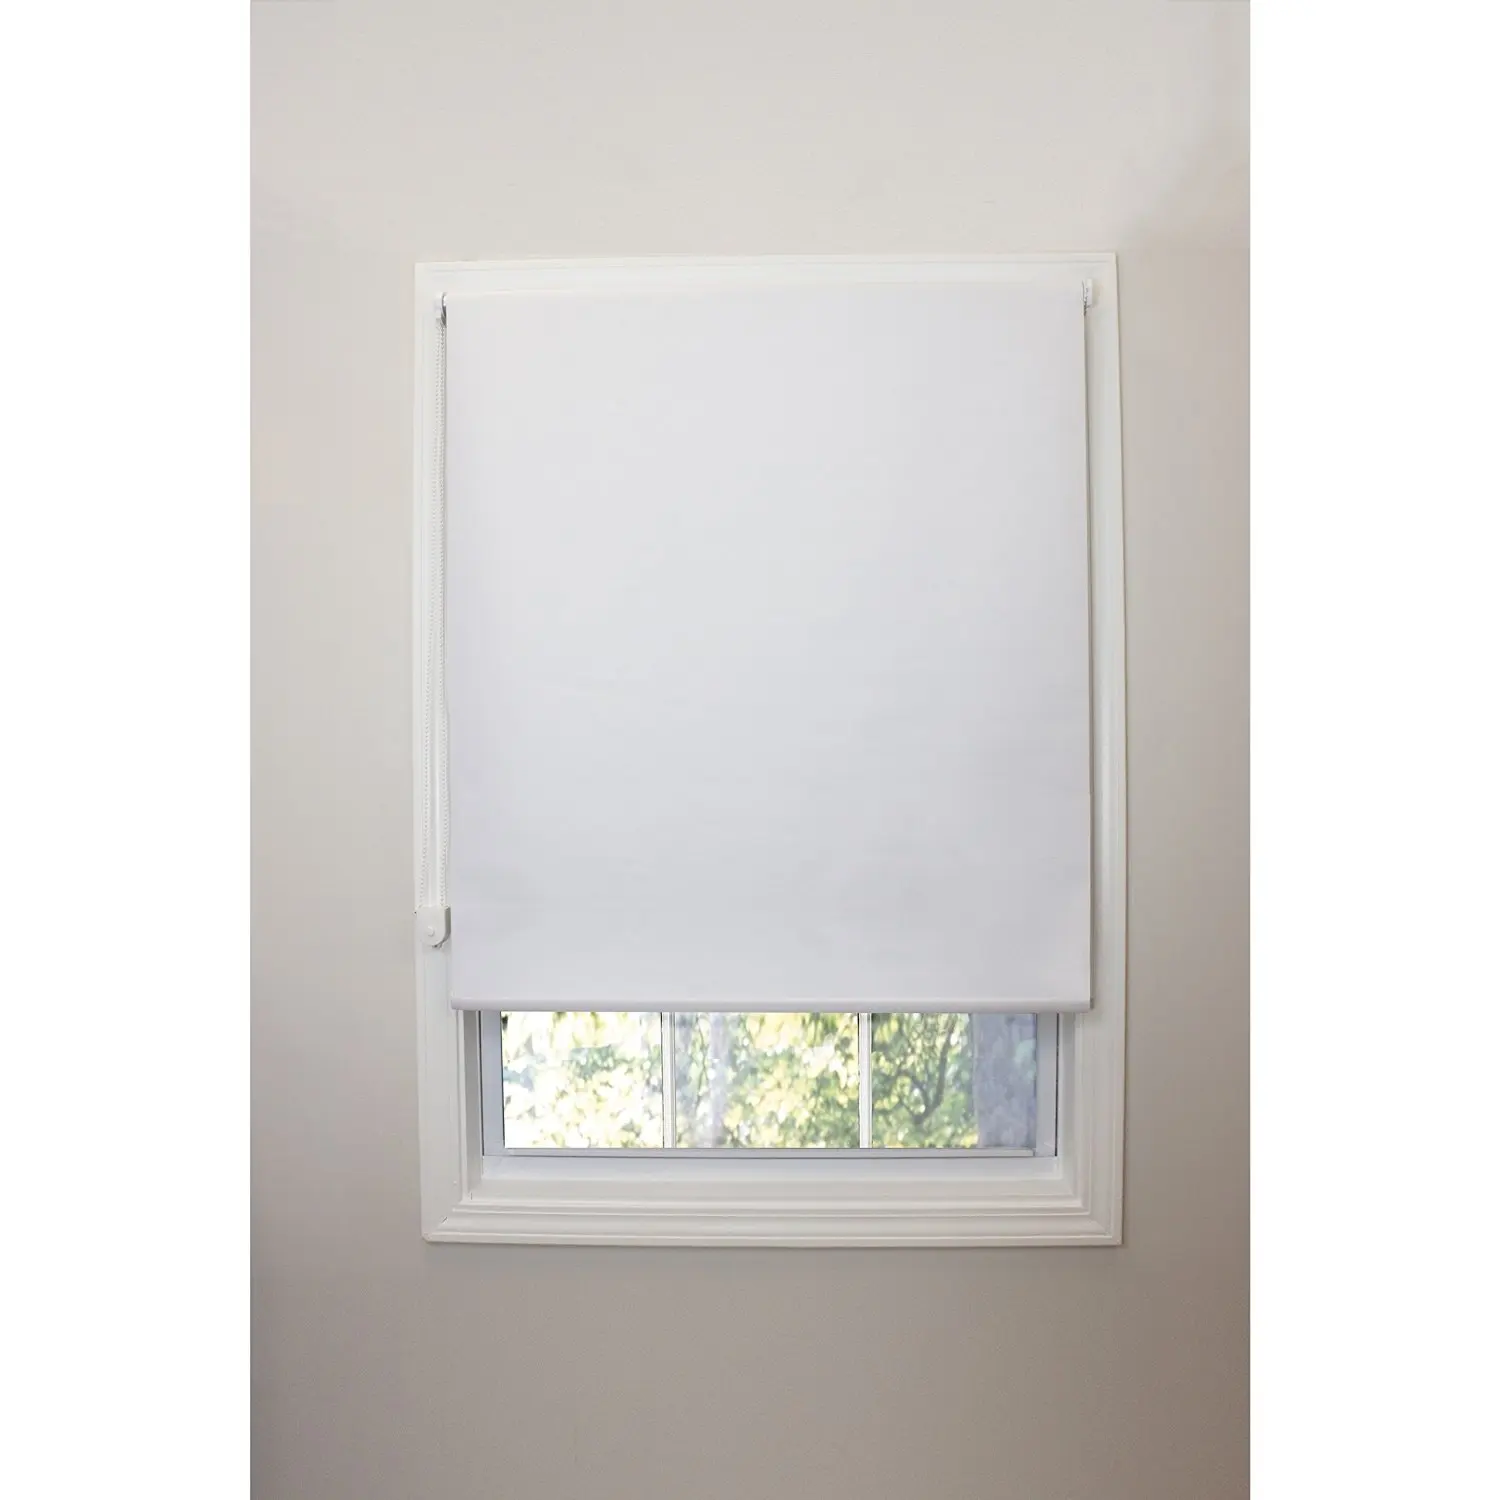 Buy Single Piece Lewis Hyman White Window Roller Shade 23x72 Curtain Blackout Includes Hardware Thermal Insulated Fabric Simple Plain Polyester Material Uv Rays Protection Inside Outside Mount In Cheap Price On Alibaba Com